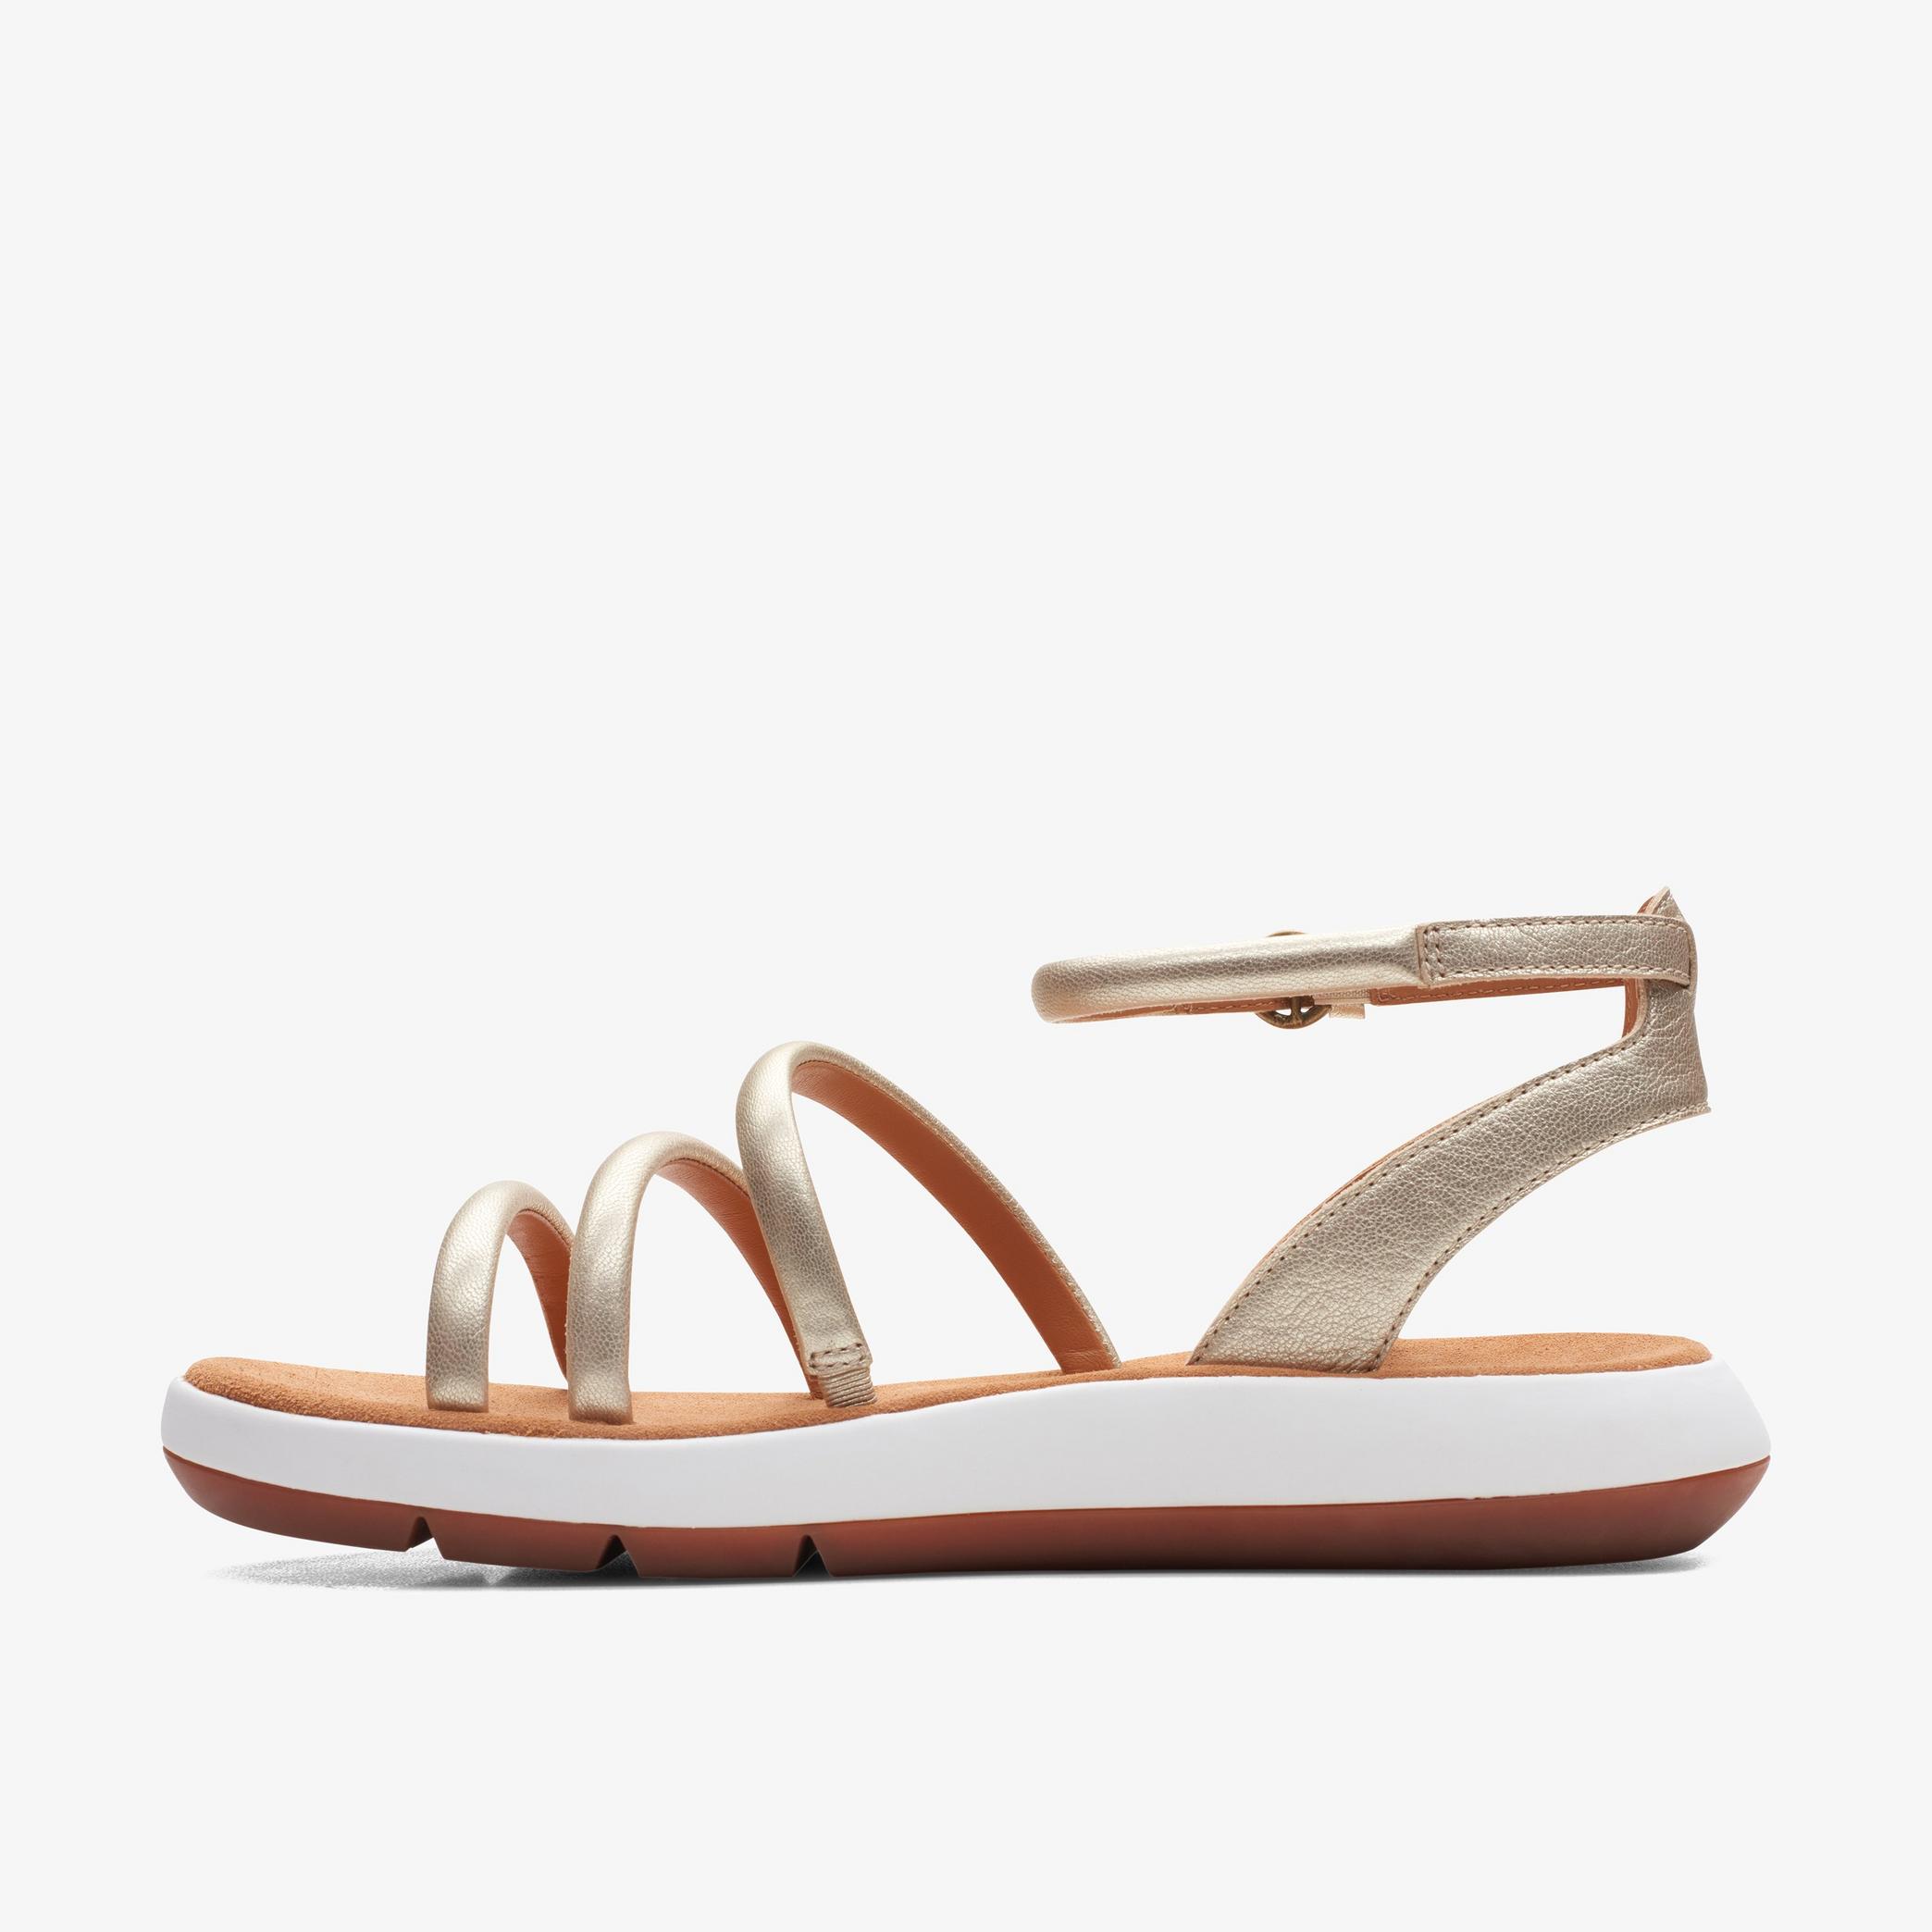 Jemsa Style Champagne Leather Flat Sandals, view 2 of 6